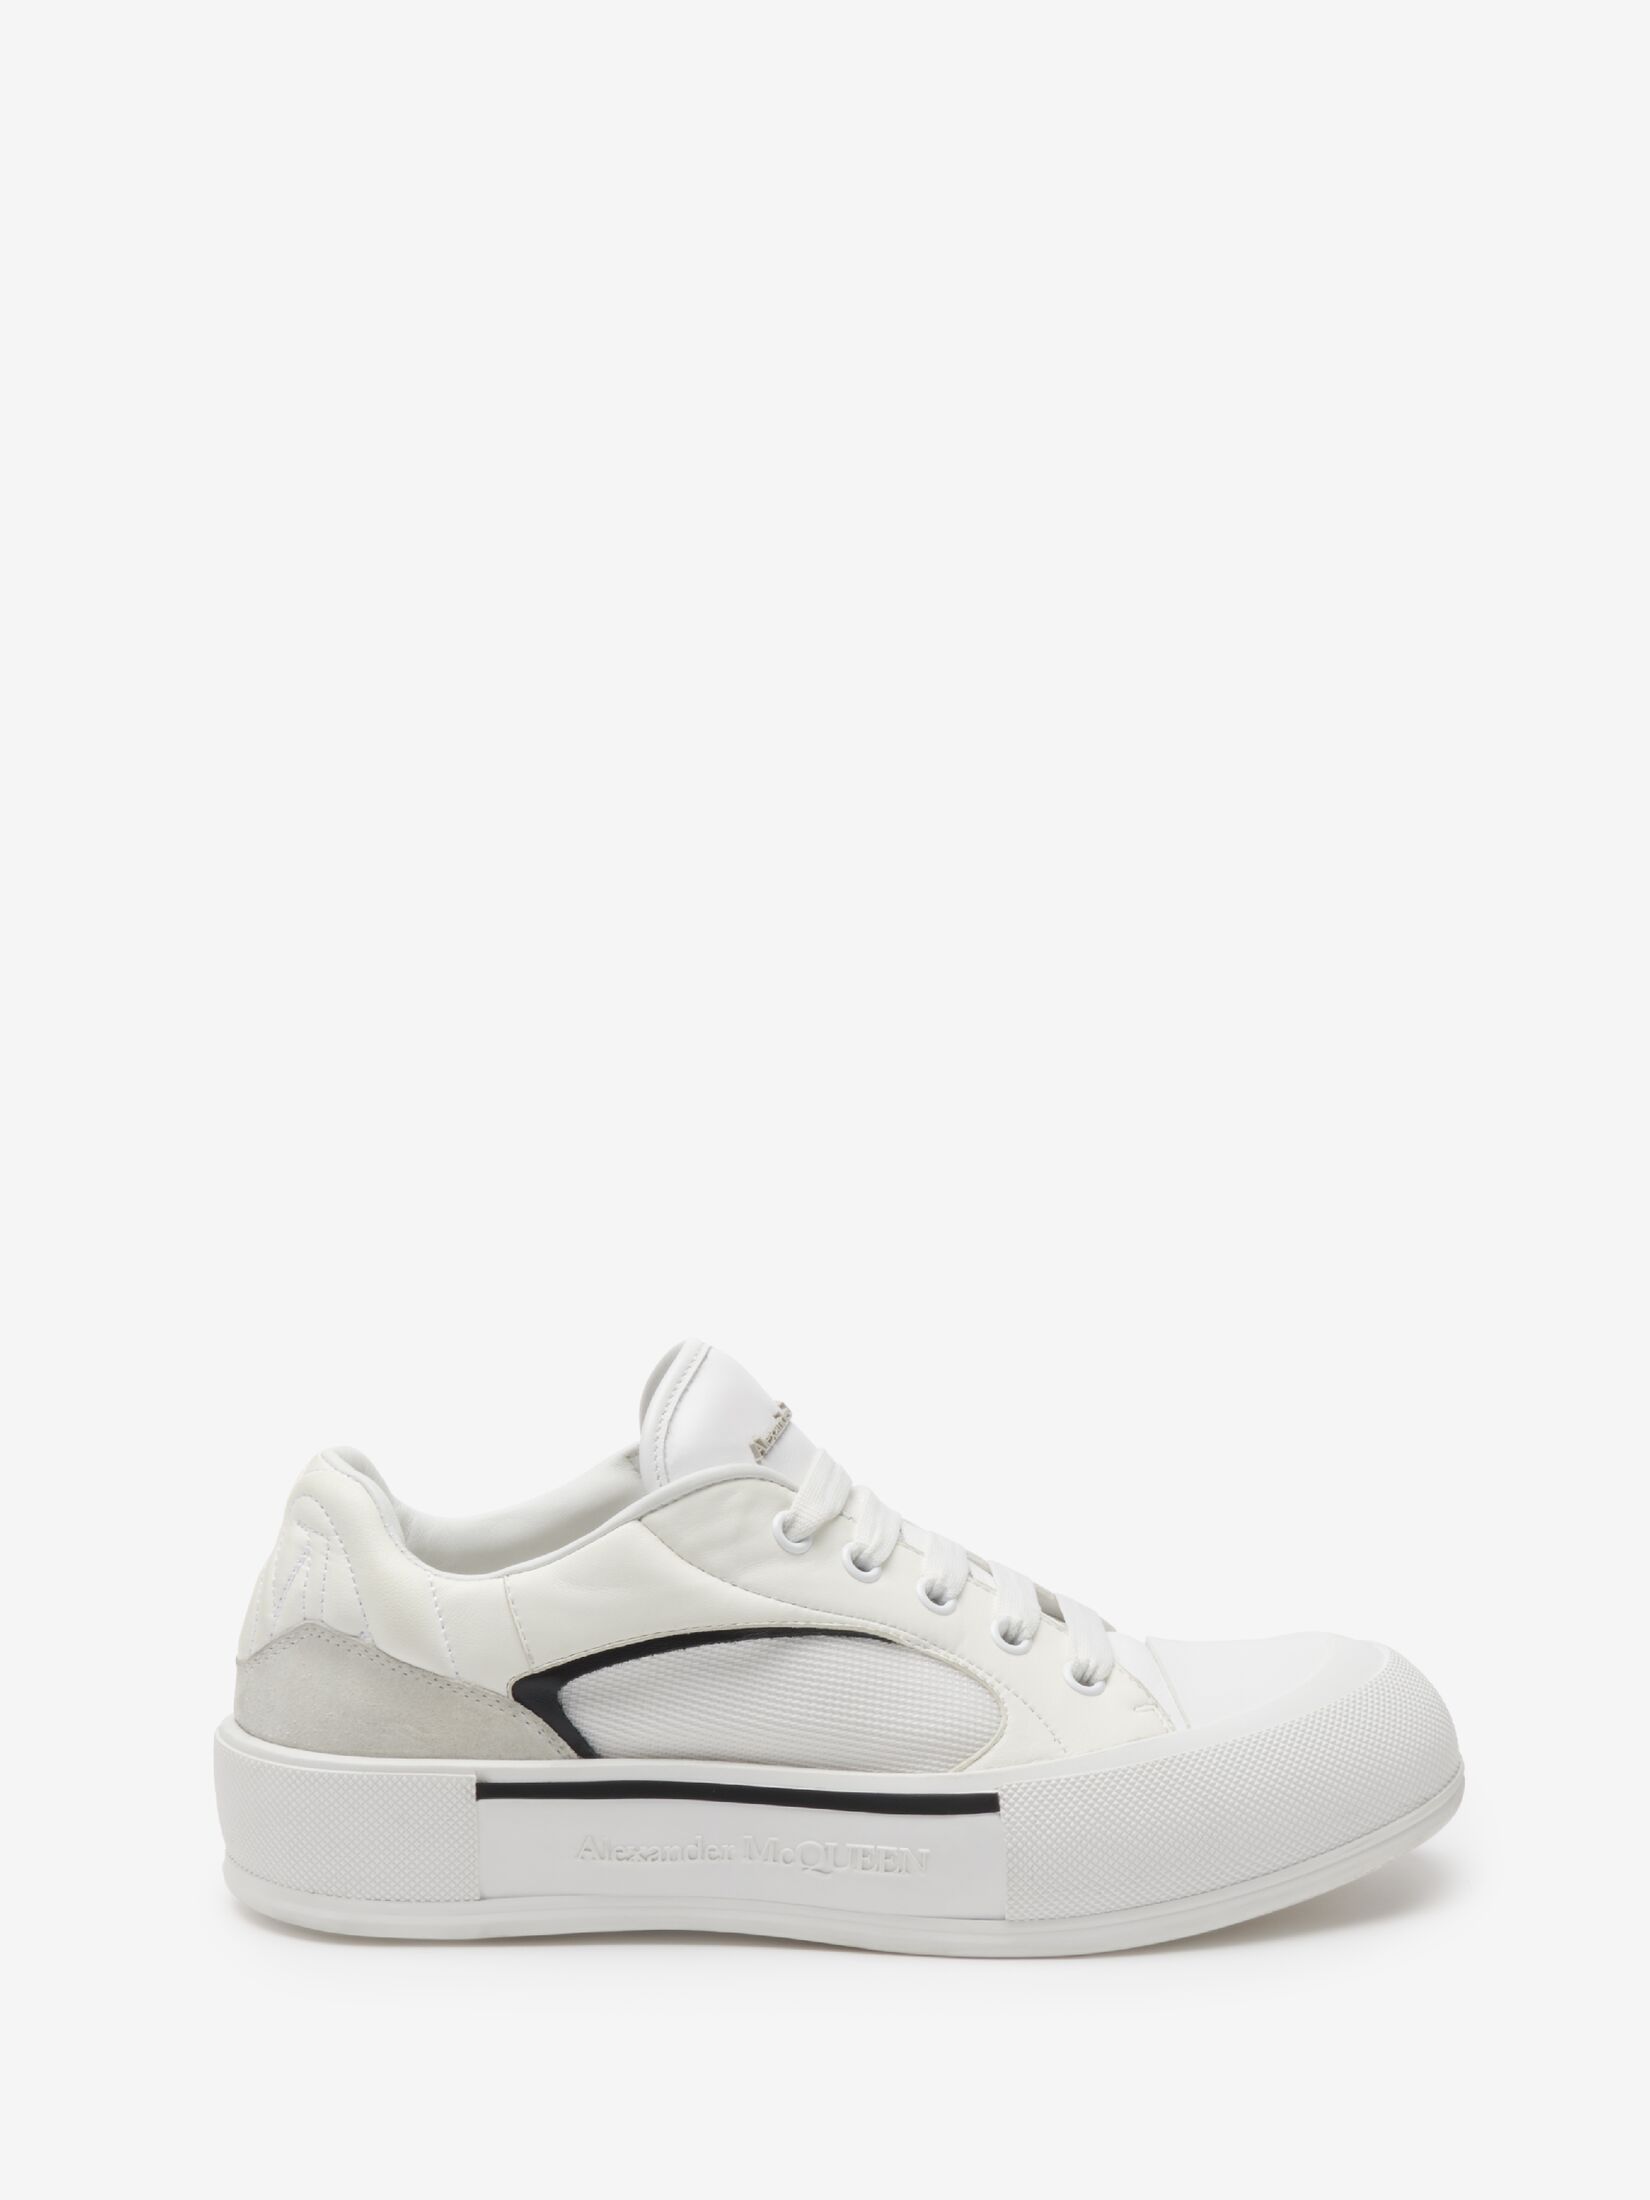 Alexander McQueen Shoes | Trainers, Boots | FARFETCH UK